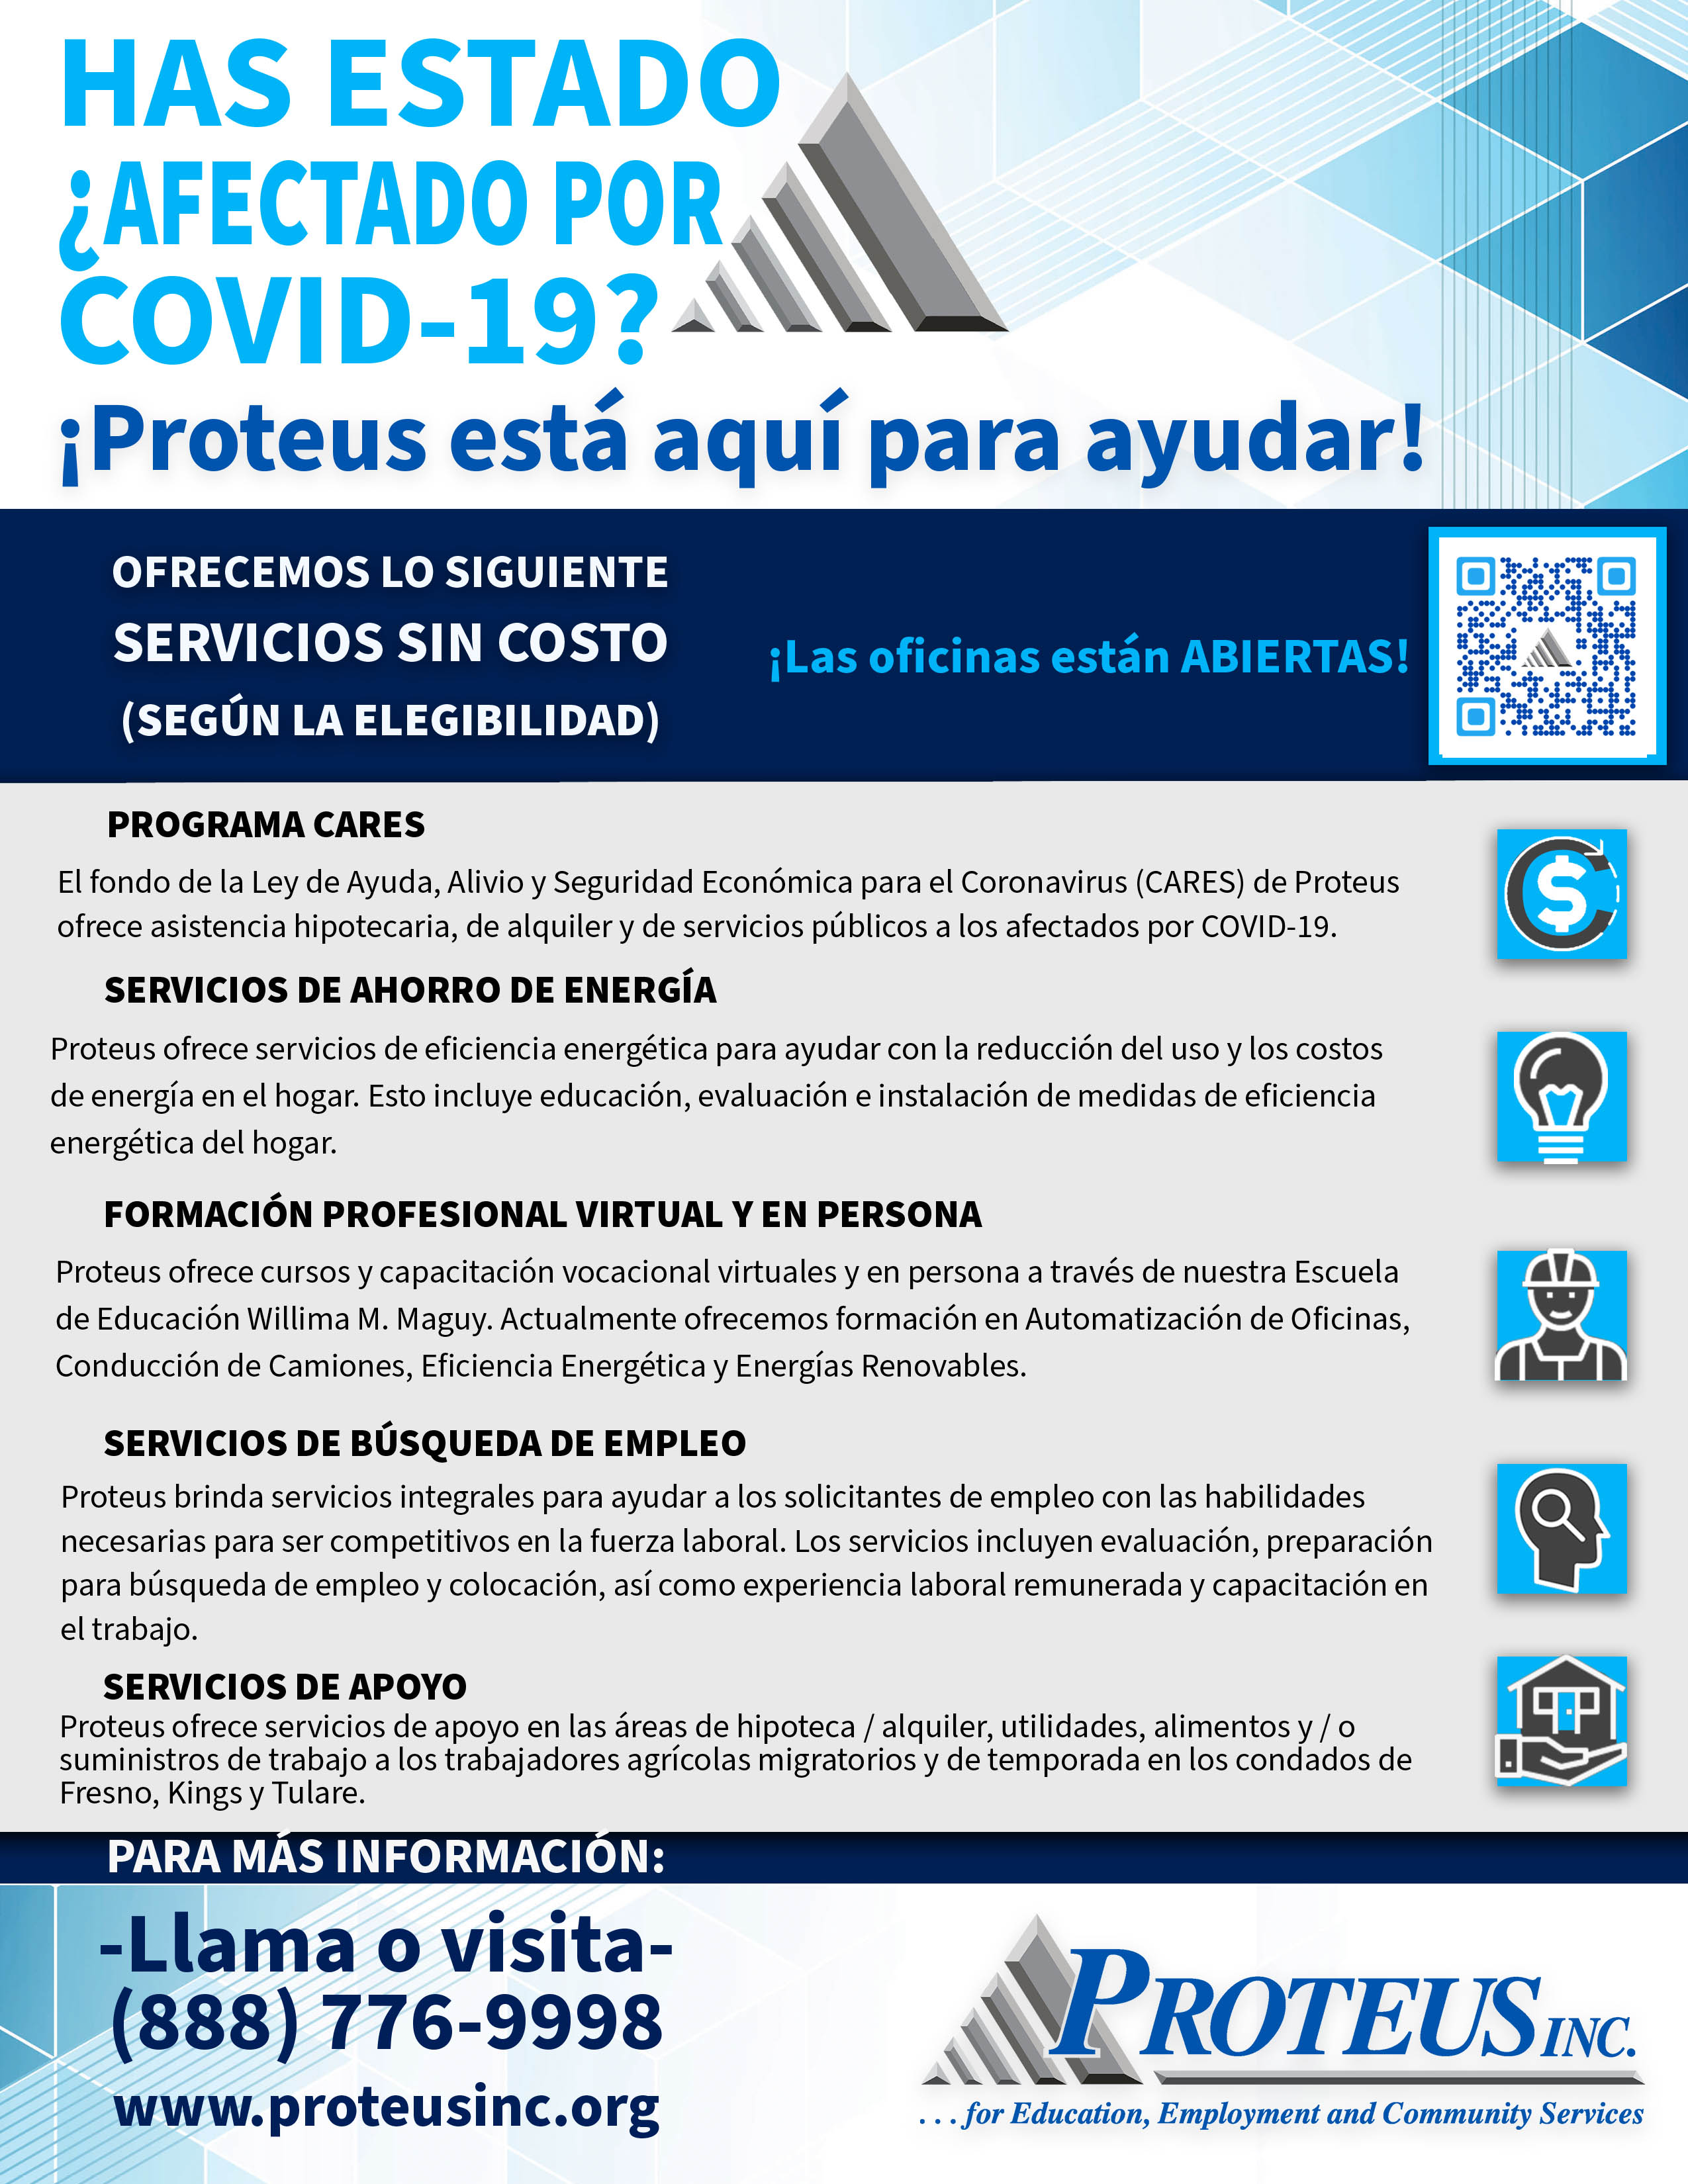 Affected by Covid-19 (Spanish) 2020.jpg